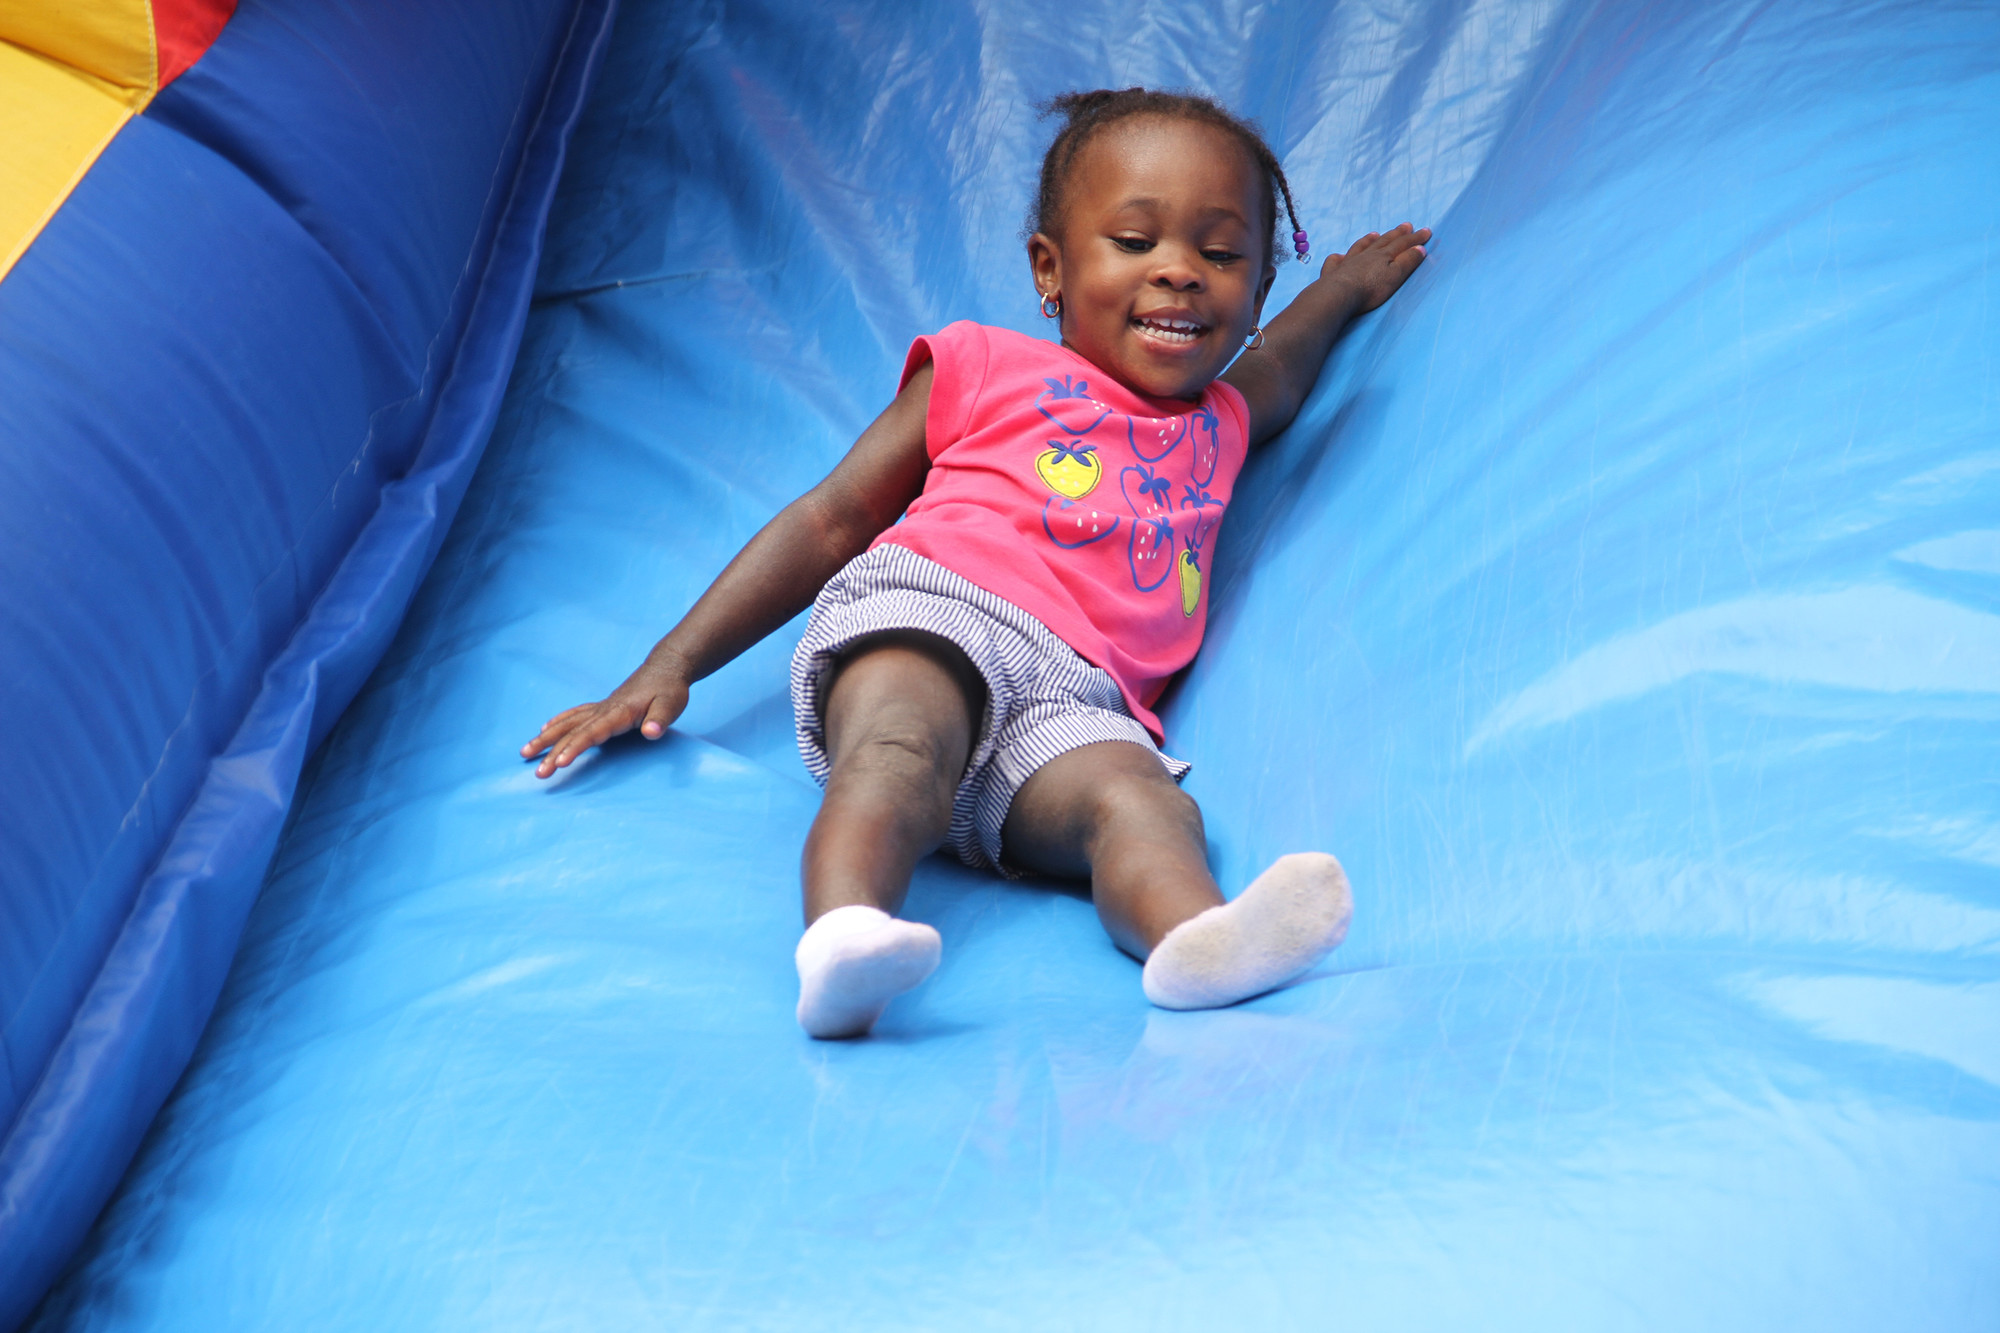 Shaliyah Lewis bounced down the giant slide.